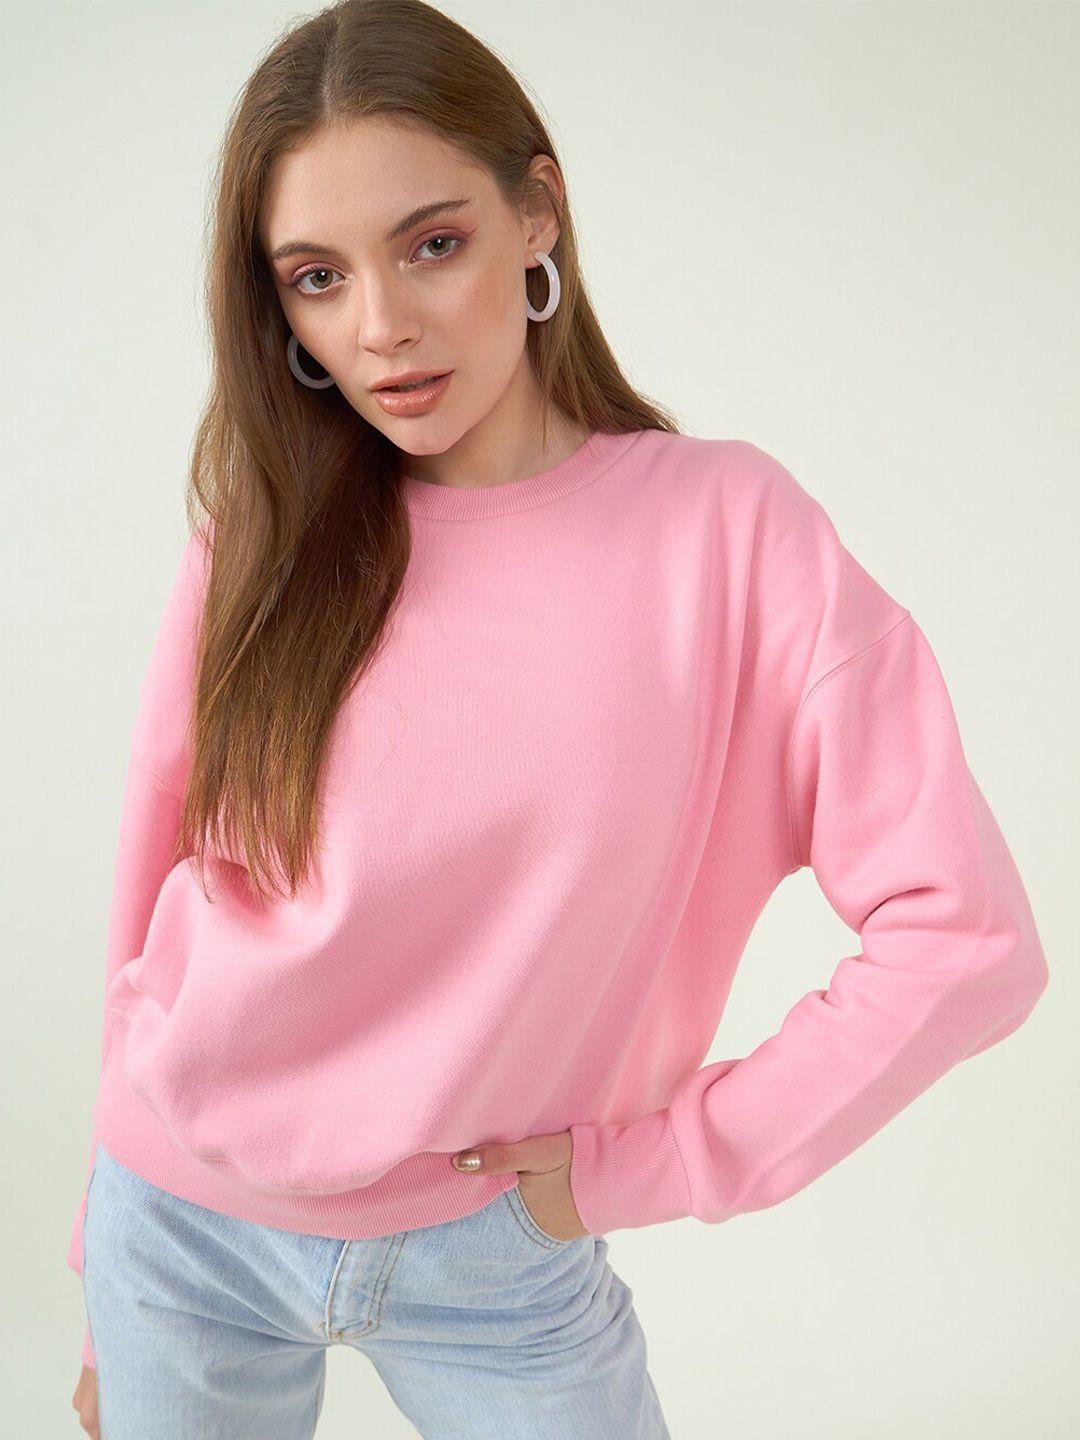 strong-and-brave-odour-free-cotton-pullover-sweatshirt